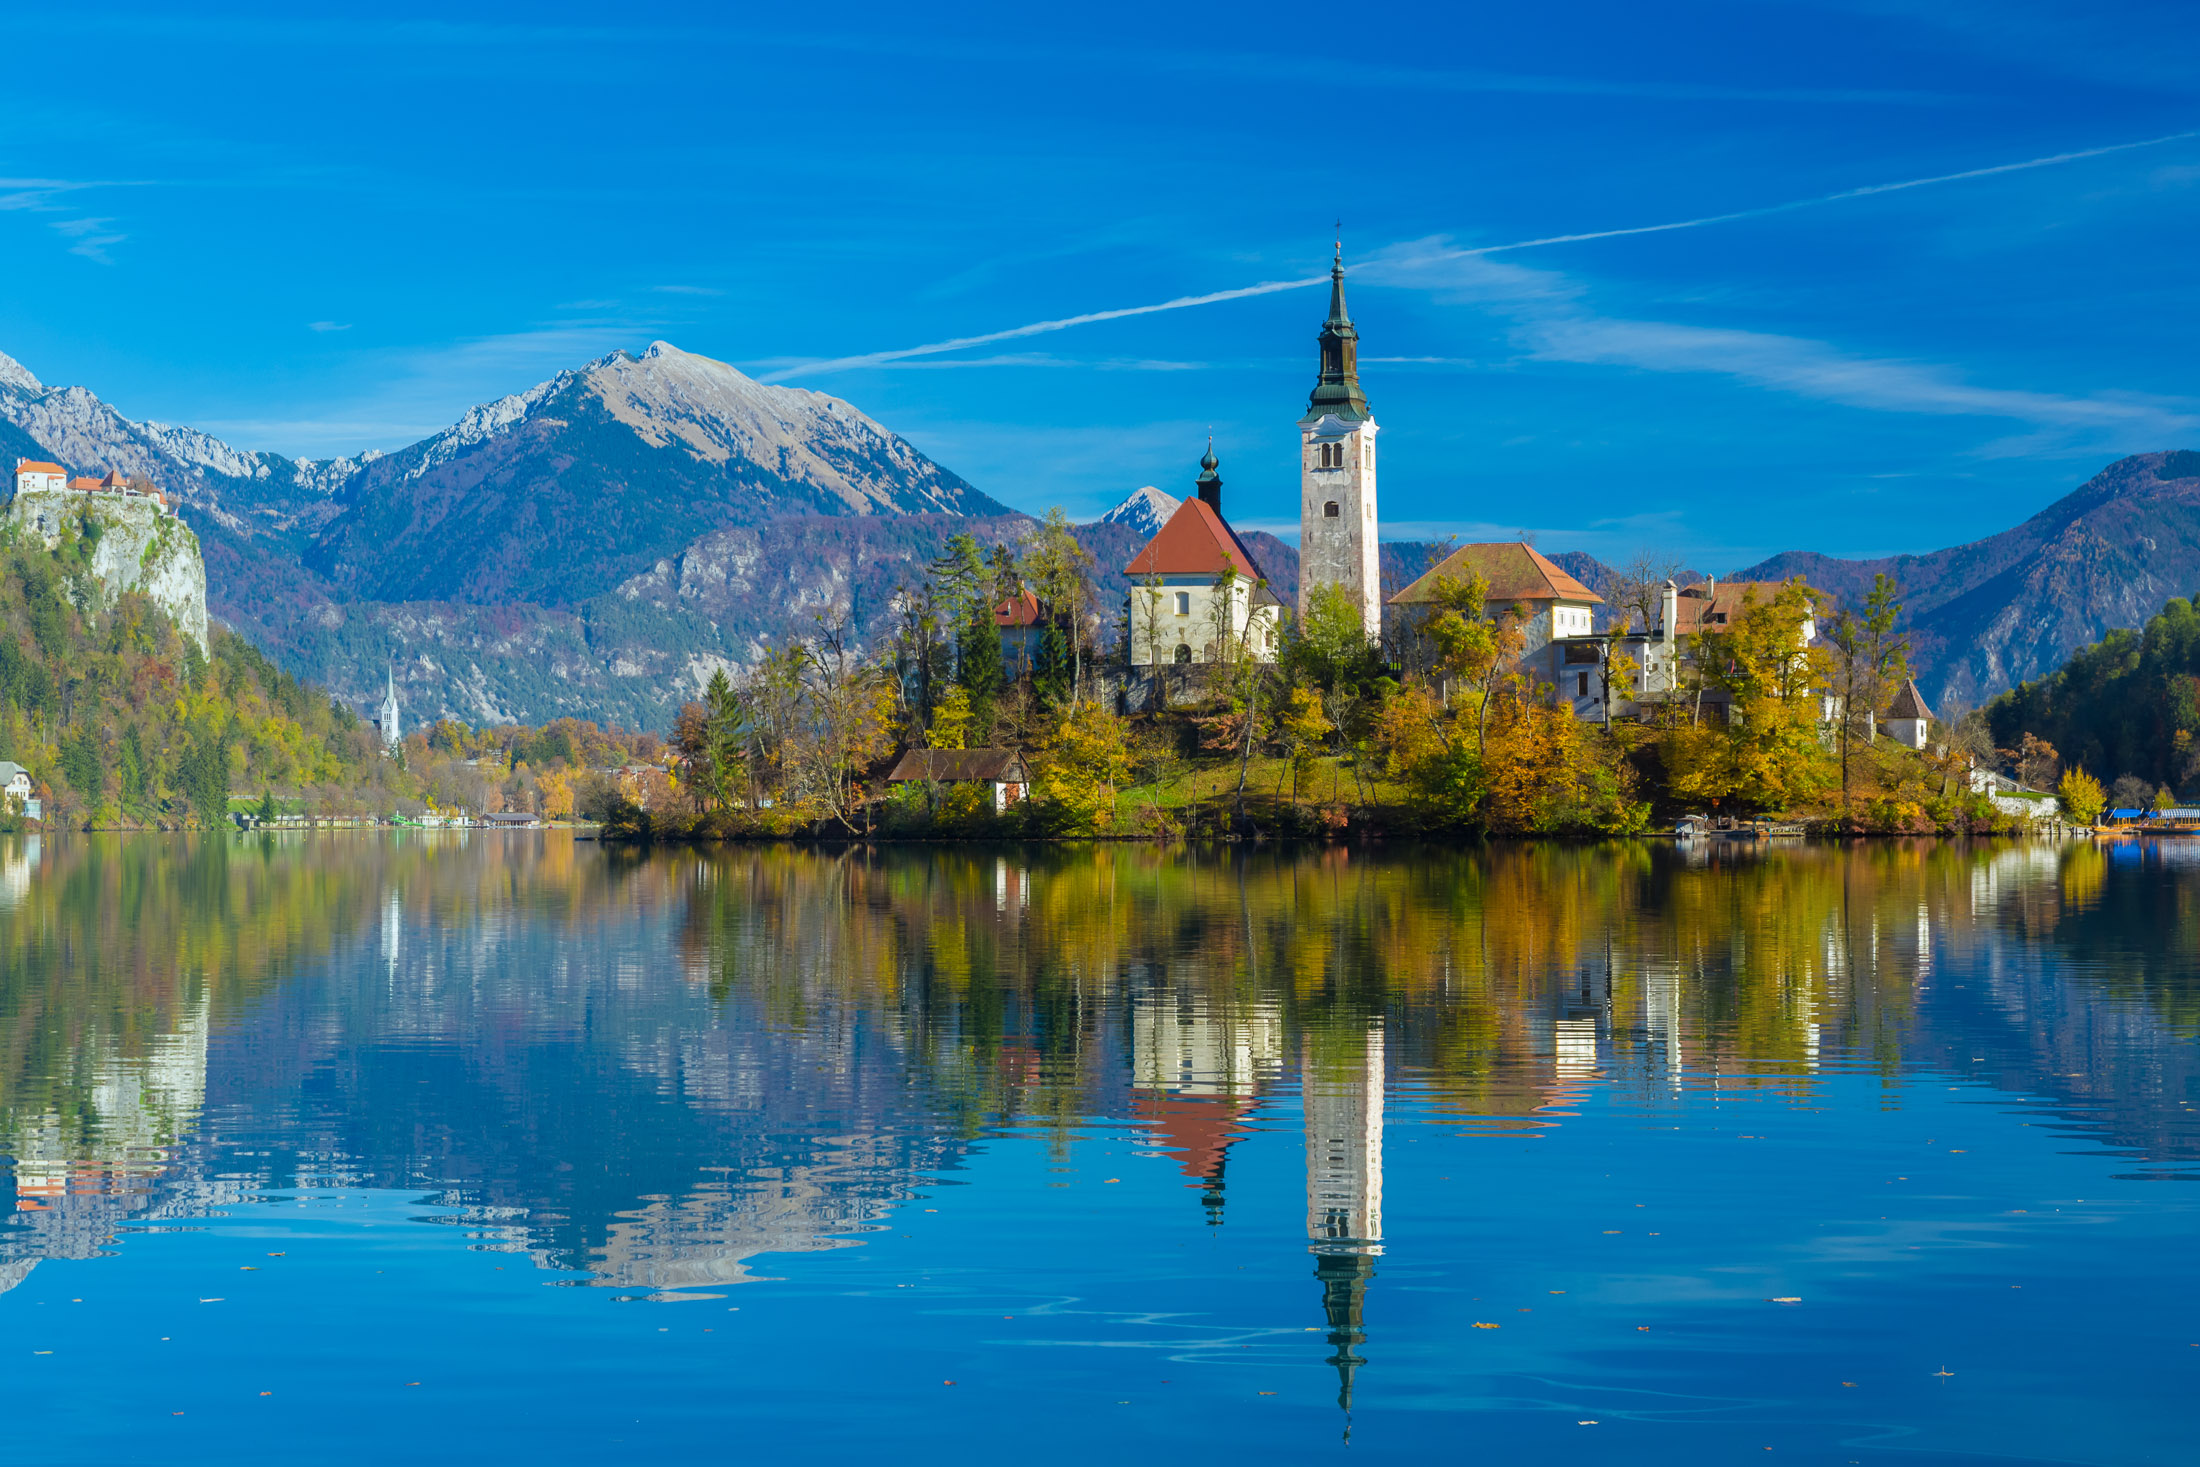 Slovenia’s Lake Bled is renowned, but there are&nbsp;other less-touristed sights to see.